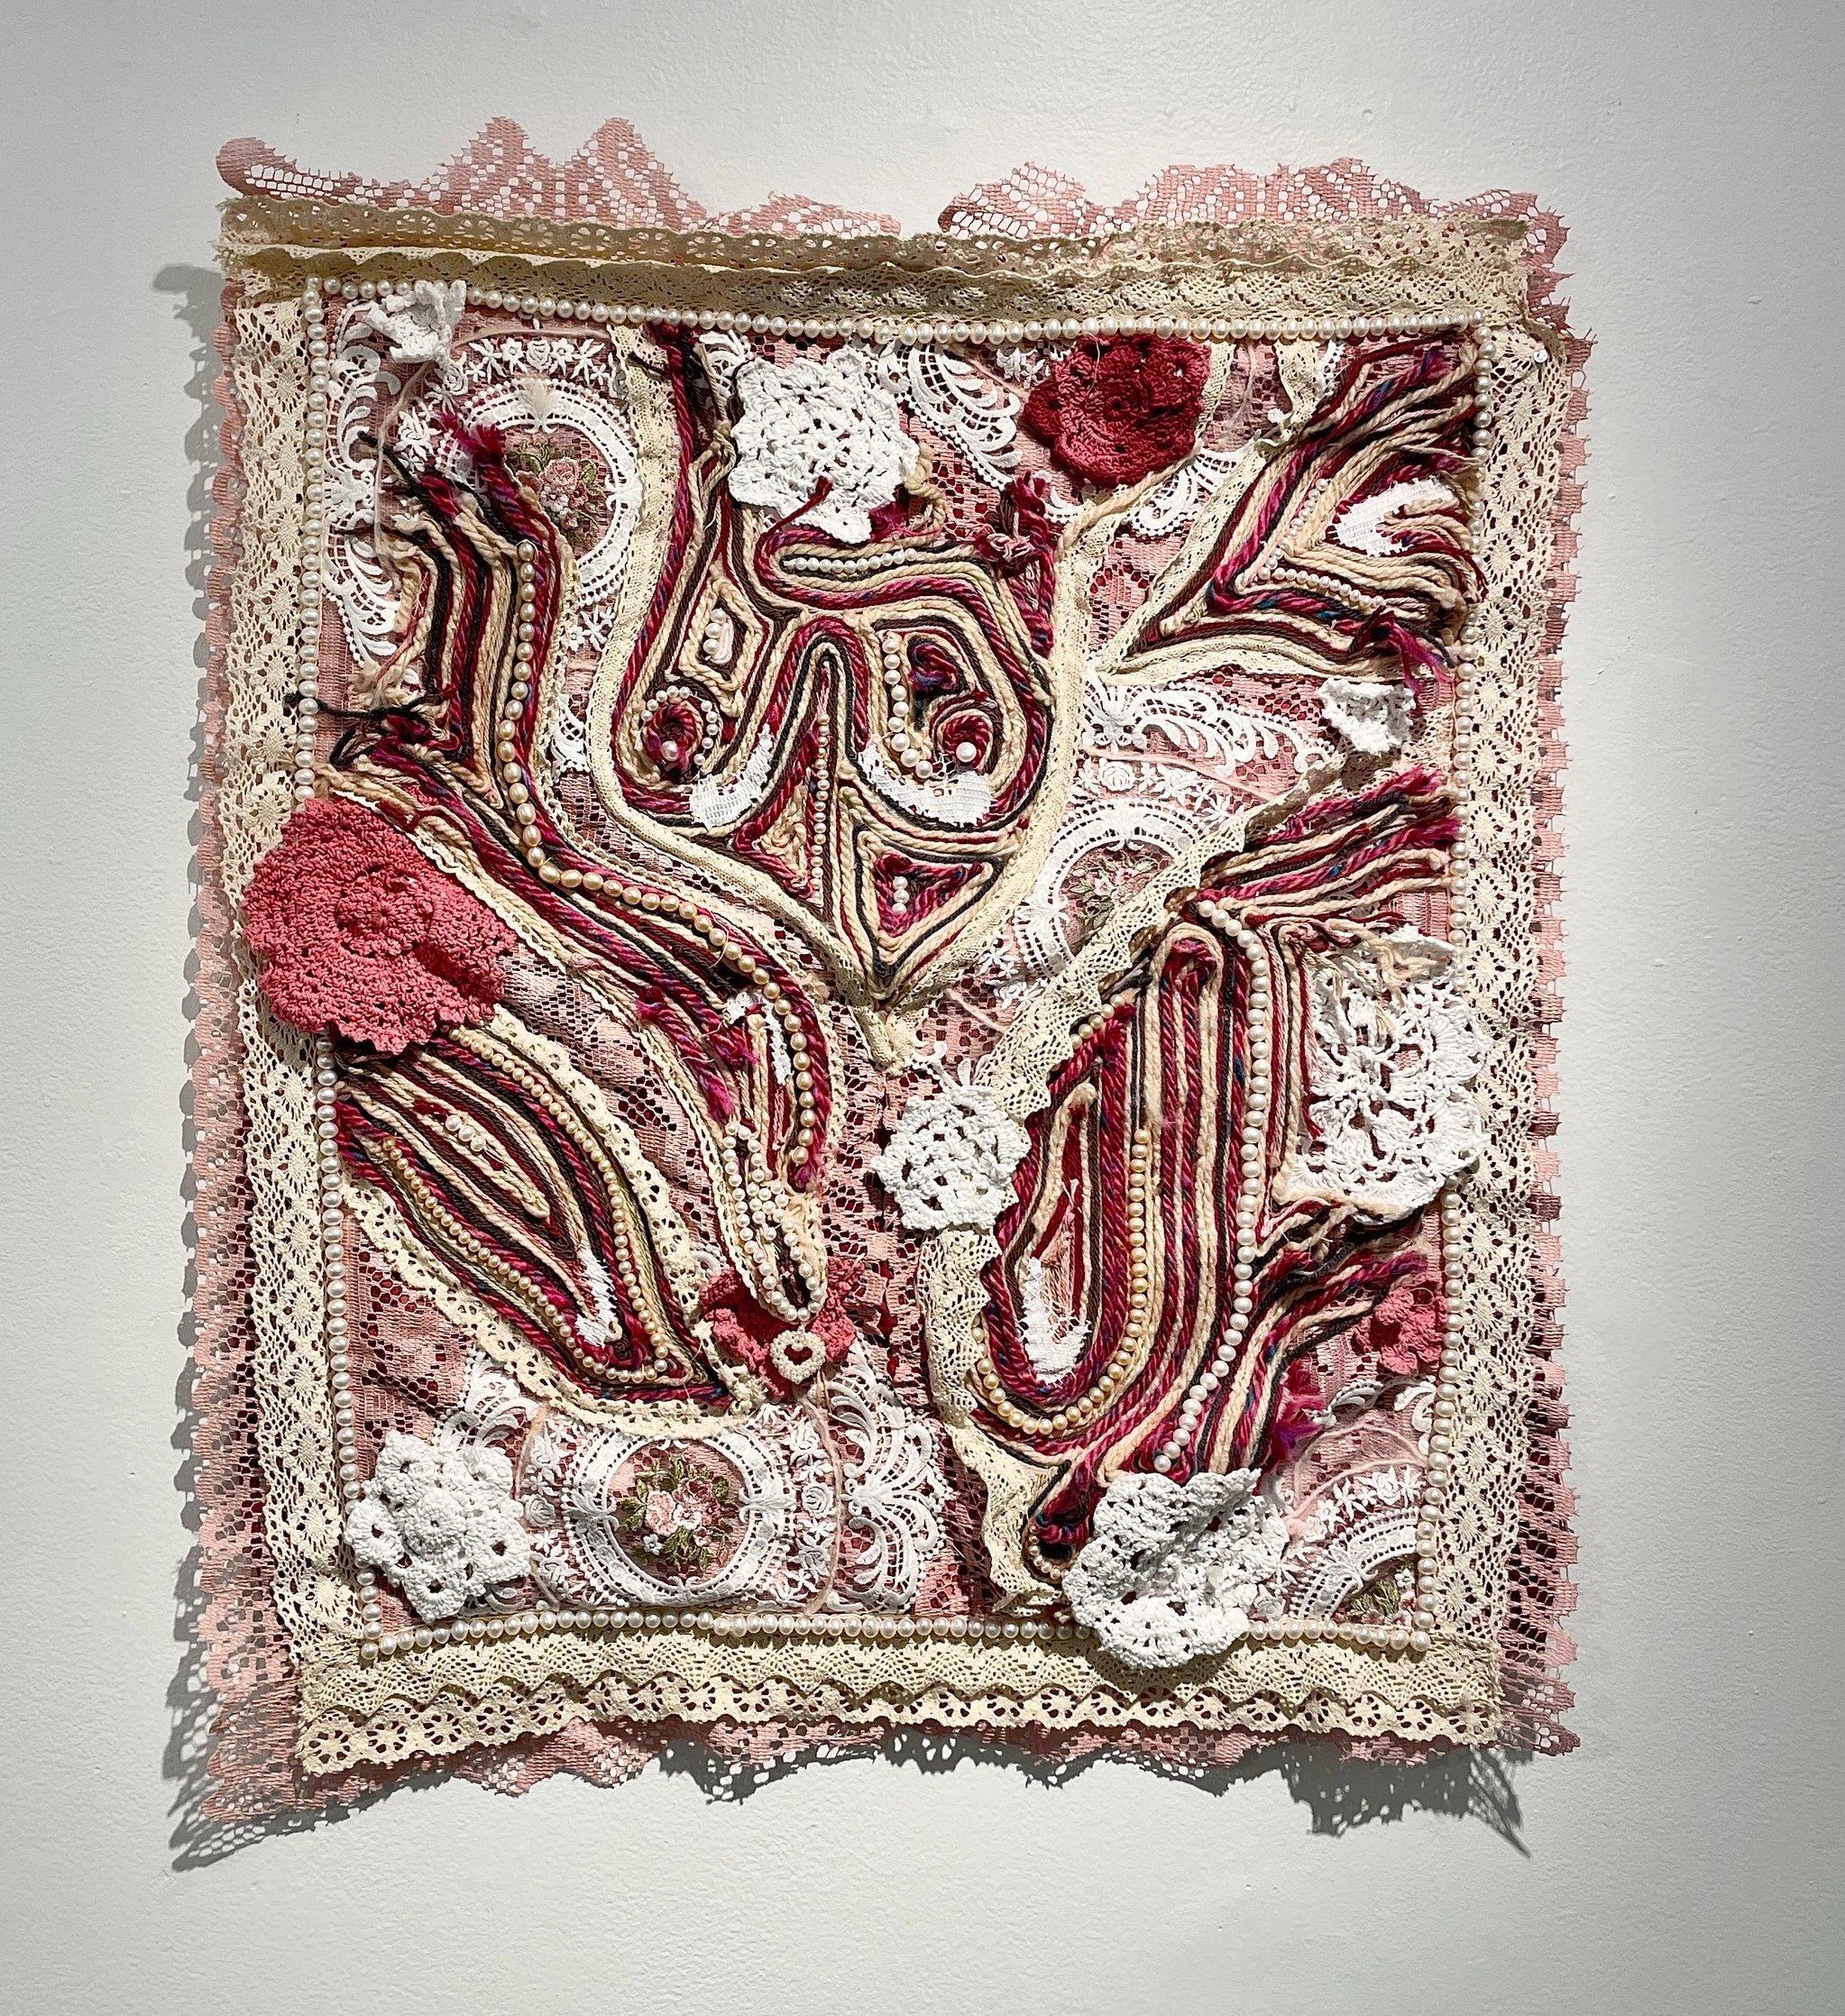  Lady Like  Sonja Czekalski&nbsp;  Yarn, Pearls, and Miscellaneous Fabrics and Wool&nbsp;  2021&nbsp;  $600     I am an interdisciplinary artist, driven to tell women’s stories. I consider the bloodline of my grandmother, my mother, my sister, the we